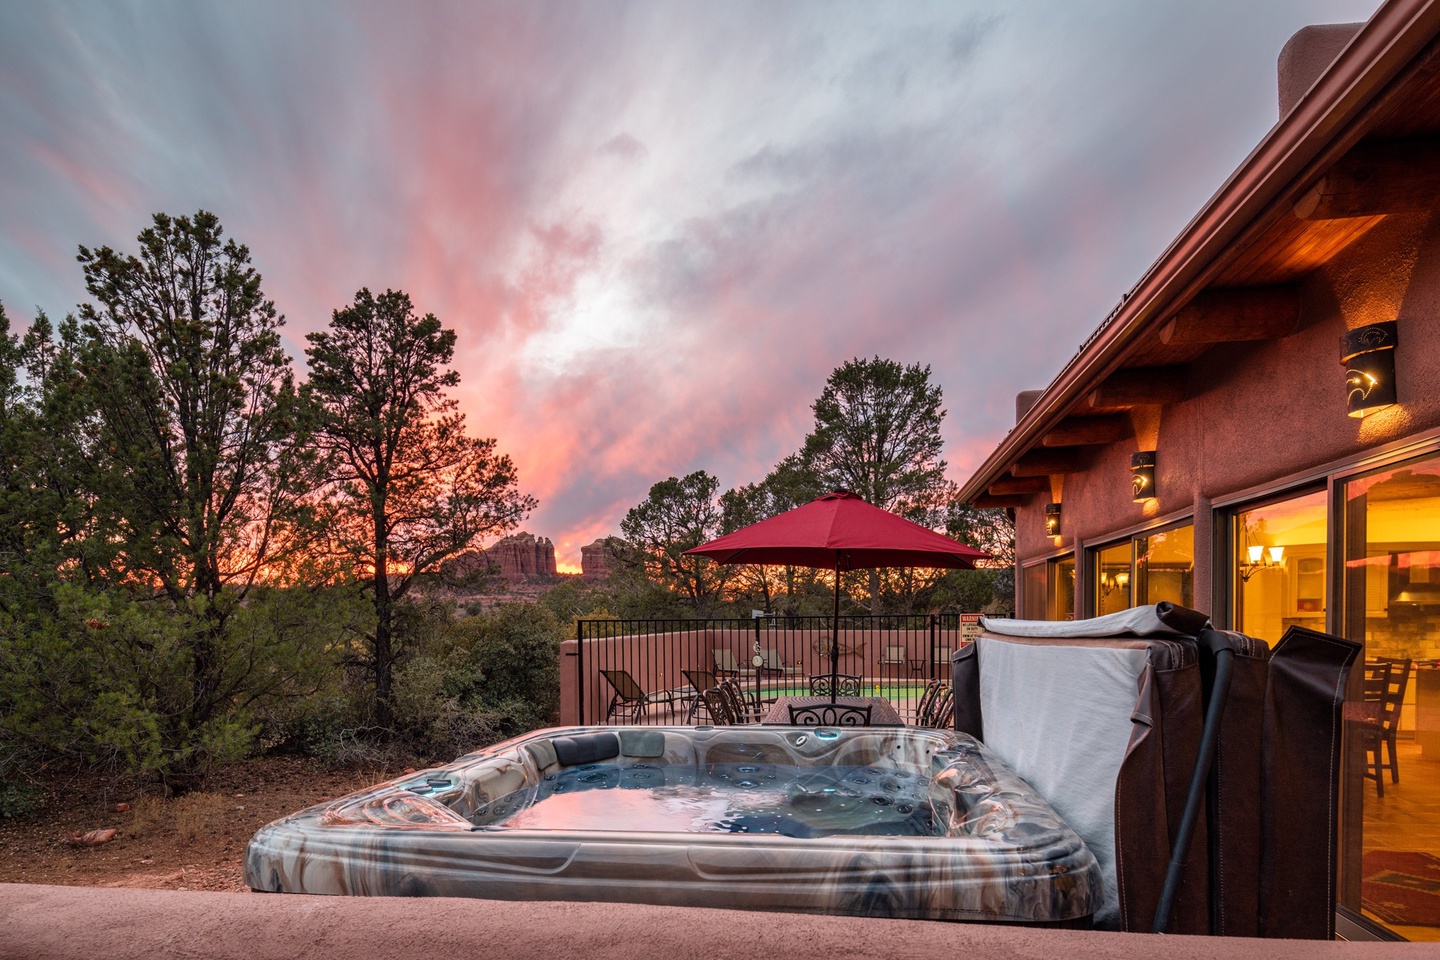 Soak in the hot tub after a long day of hiking